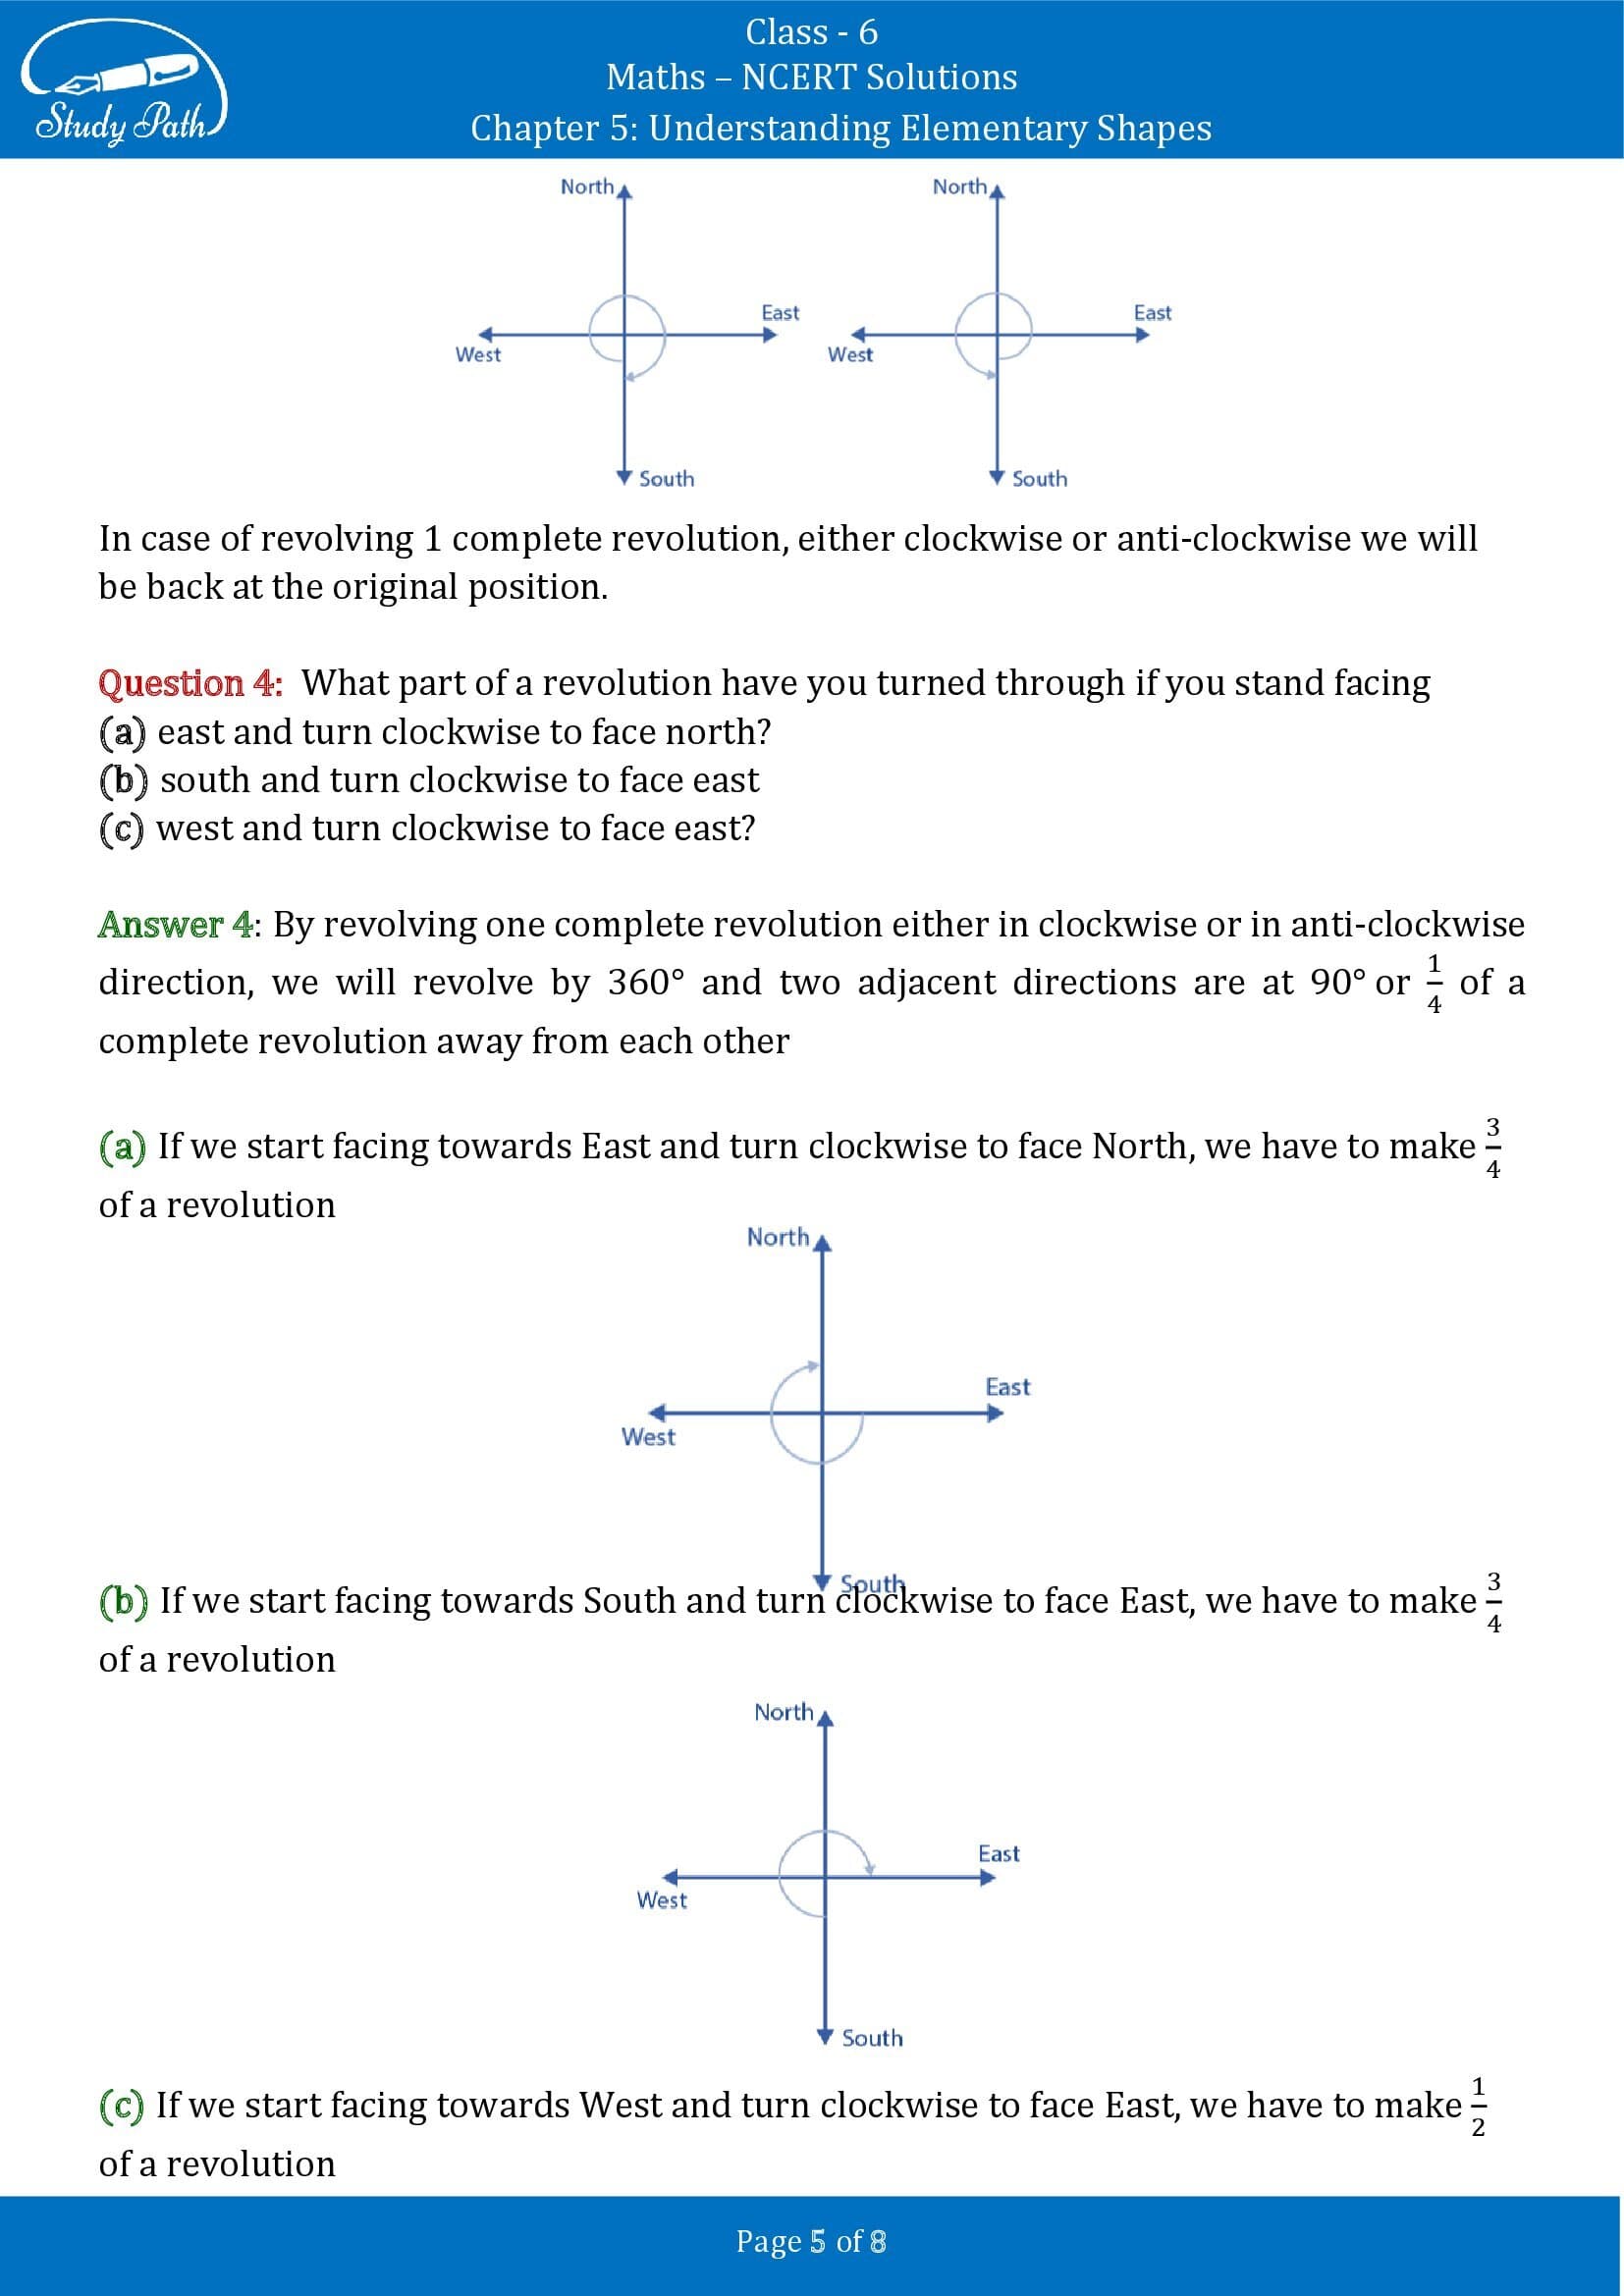 NCERT Solutions for Class 6 Maths Chapter 5 Understanding Elementary Shapes Exercise 5.2 00005